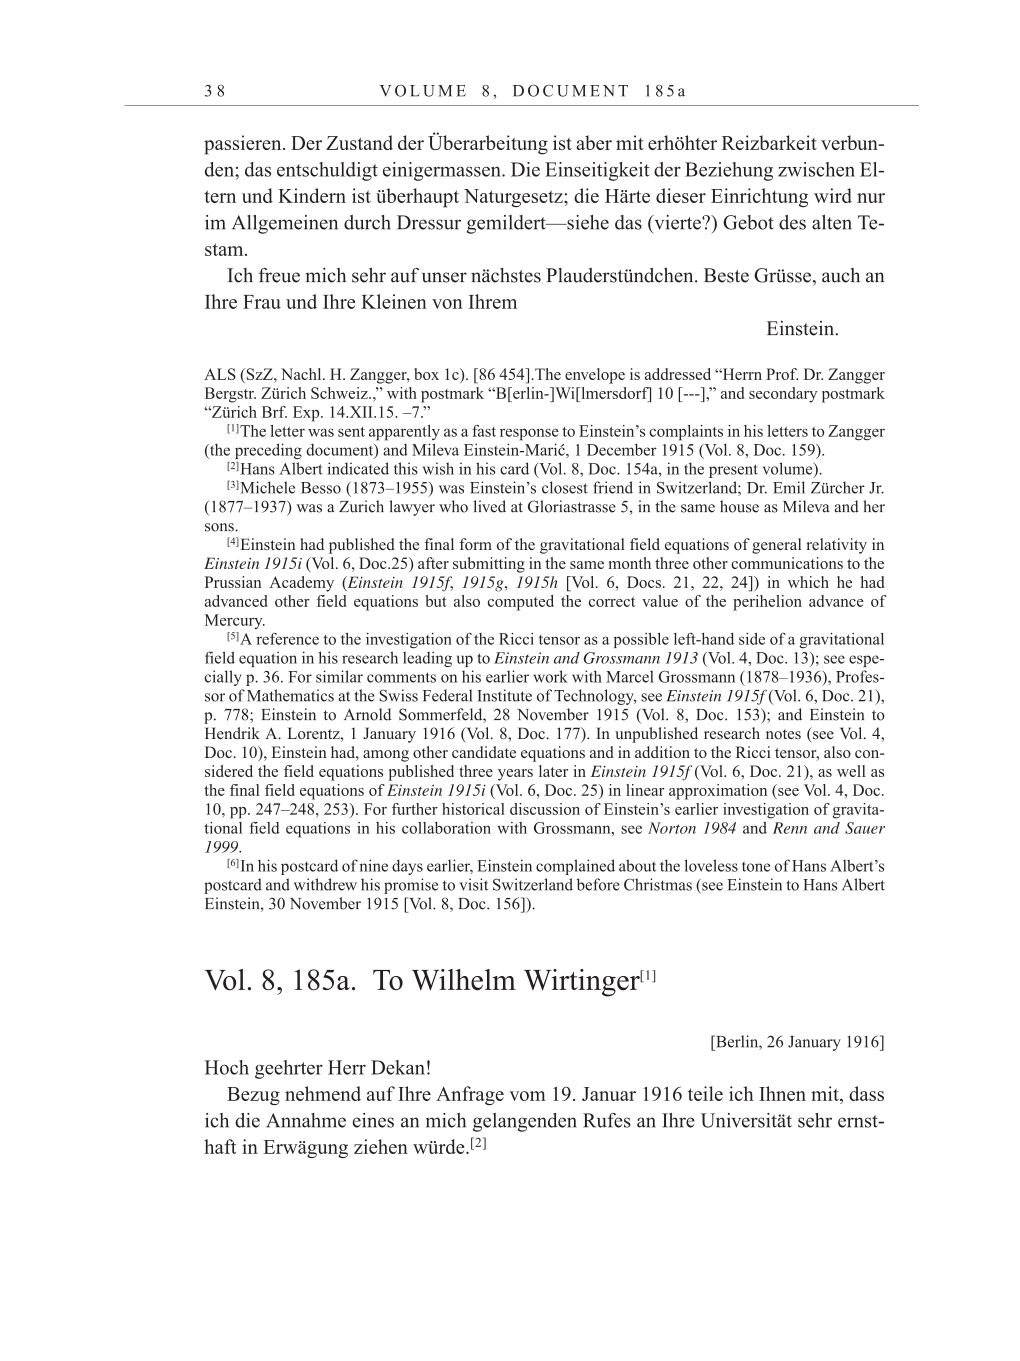 Volume 10: The Berlin Years: Correspondence May-December 1920 / Supplementary Correspondence 1909-1920 page 38